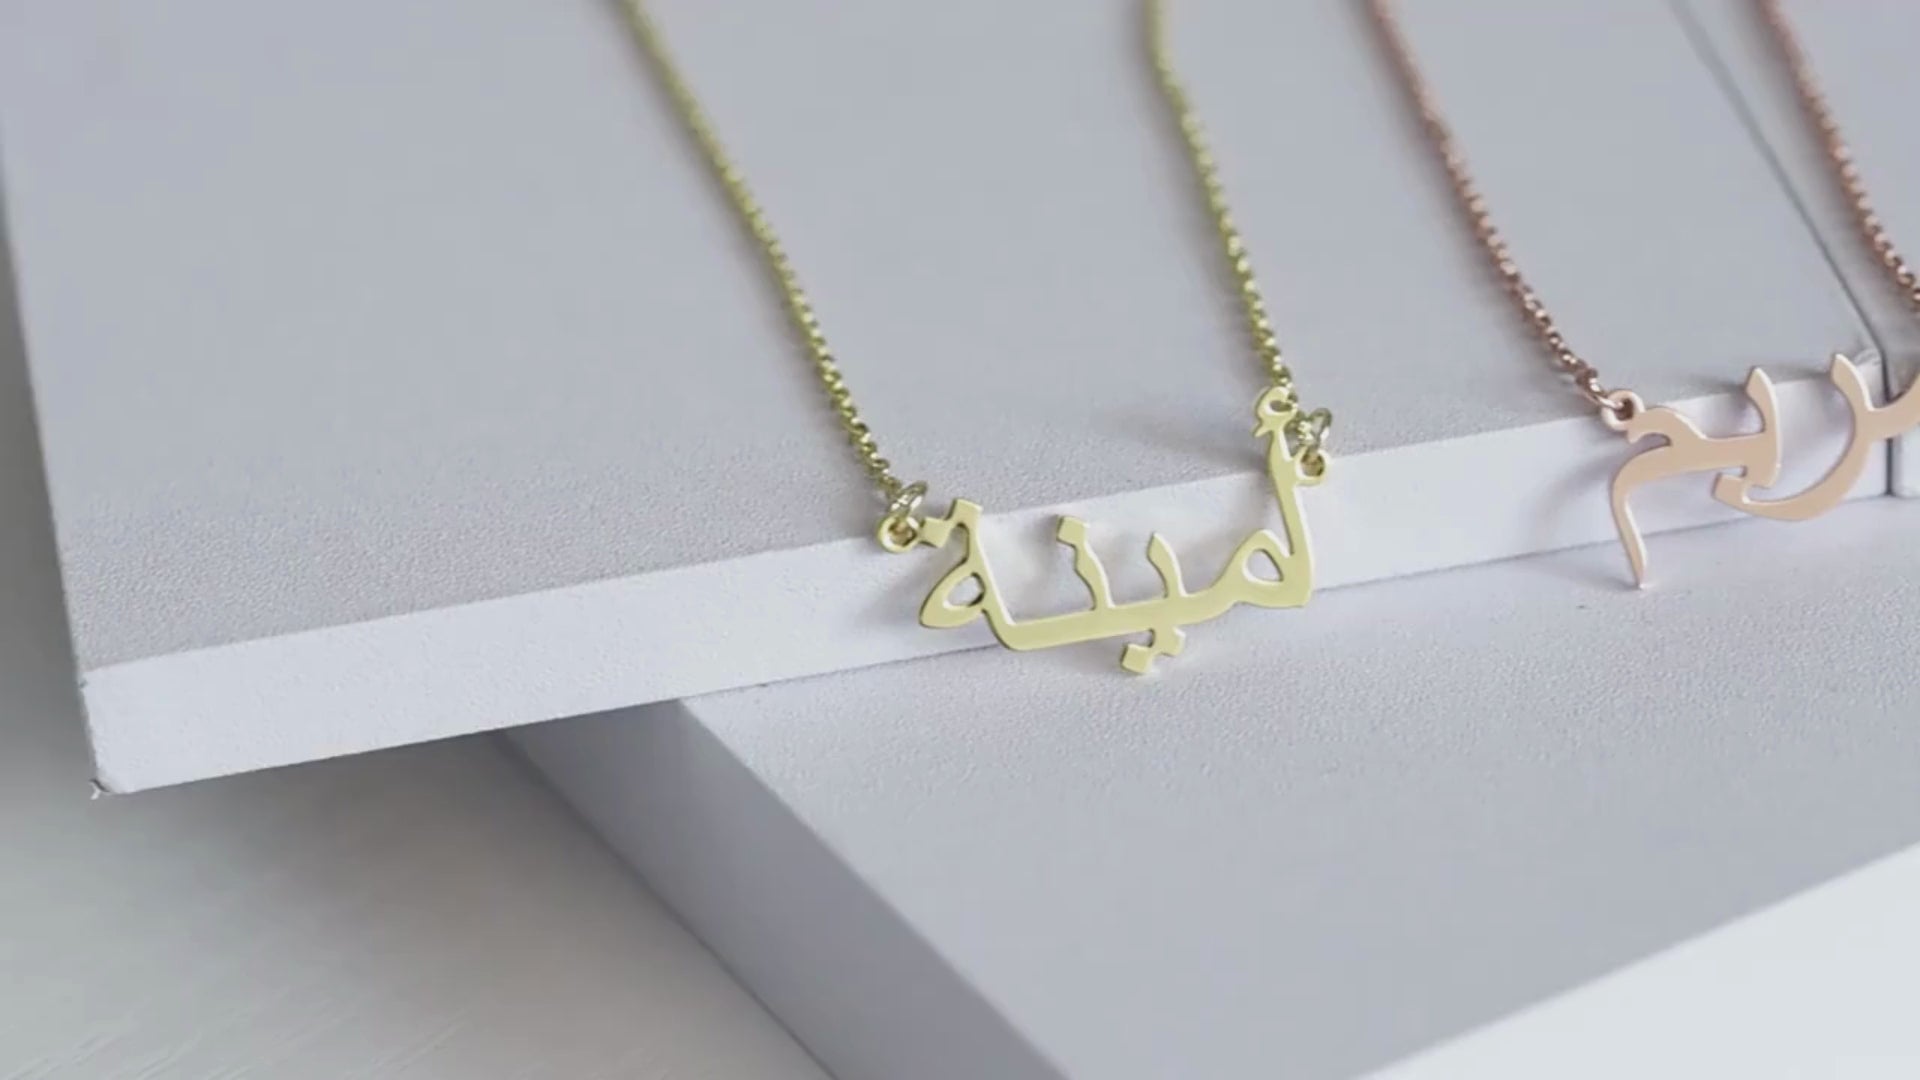 Personalised Arabic Name Necklace - Nameplate Calligraphy Necklace Gold |  Name necklace, Simple jewelry, Arabic nameplate necklace